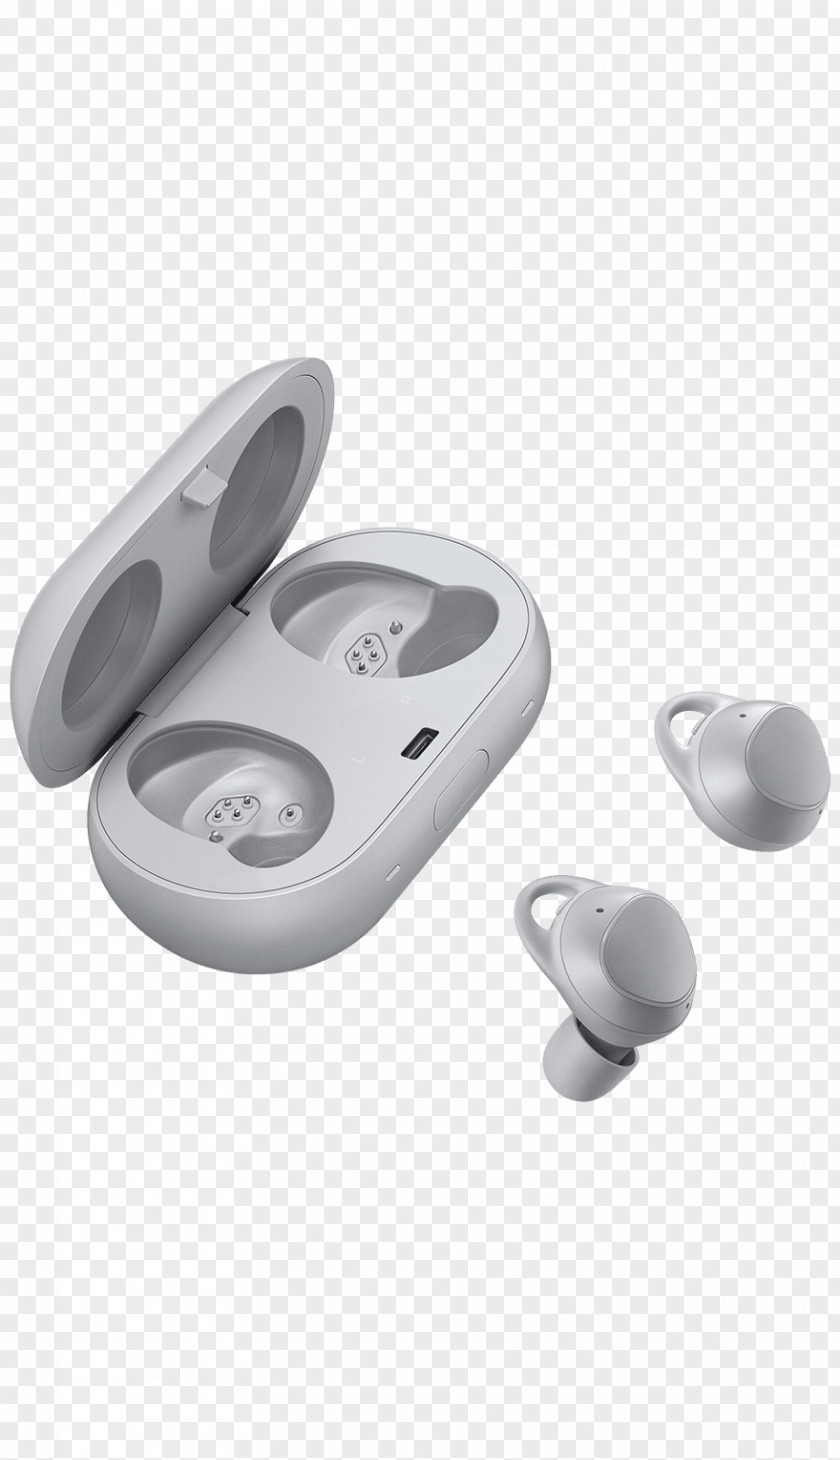 Samsung Gear IconX (2018) Headphones PNG